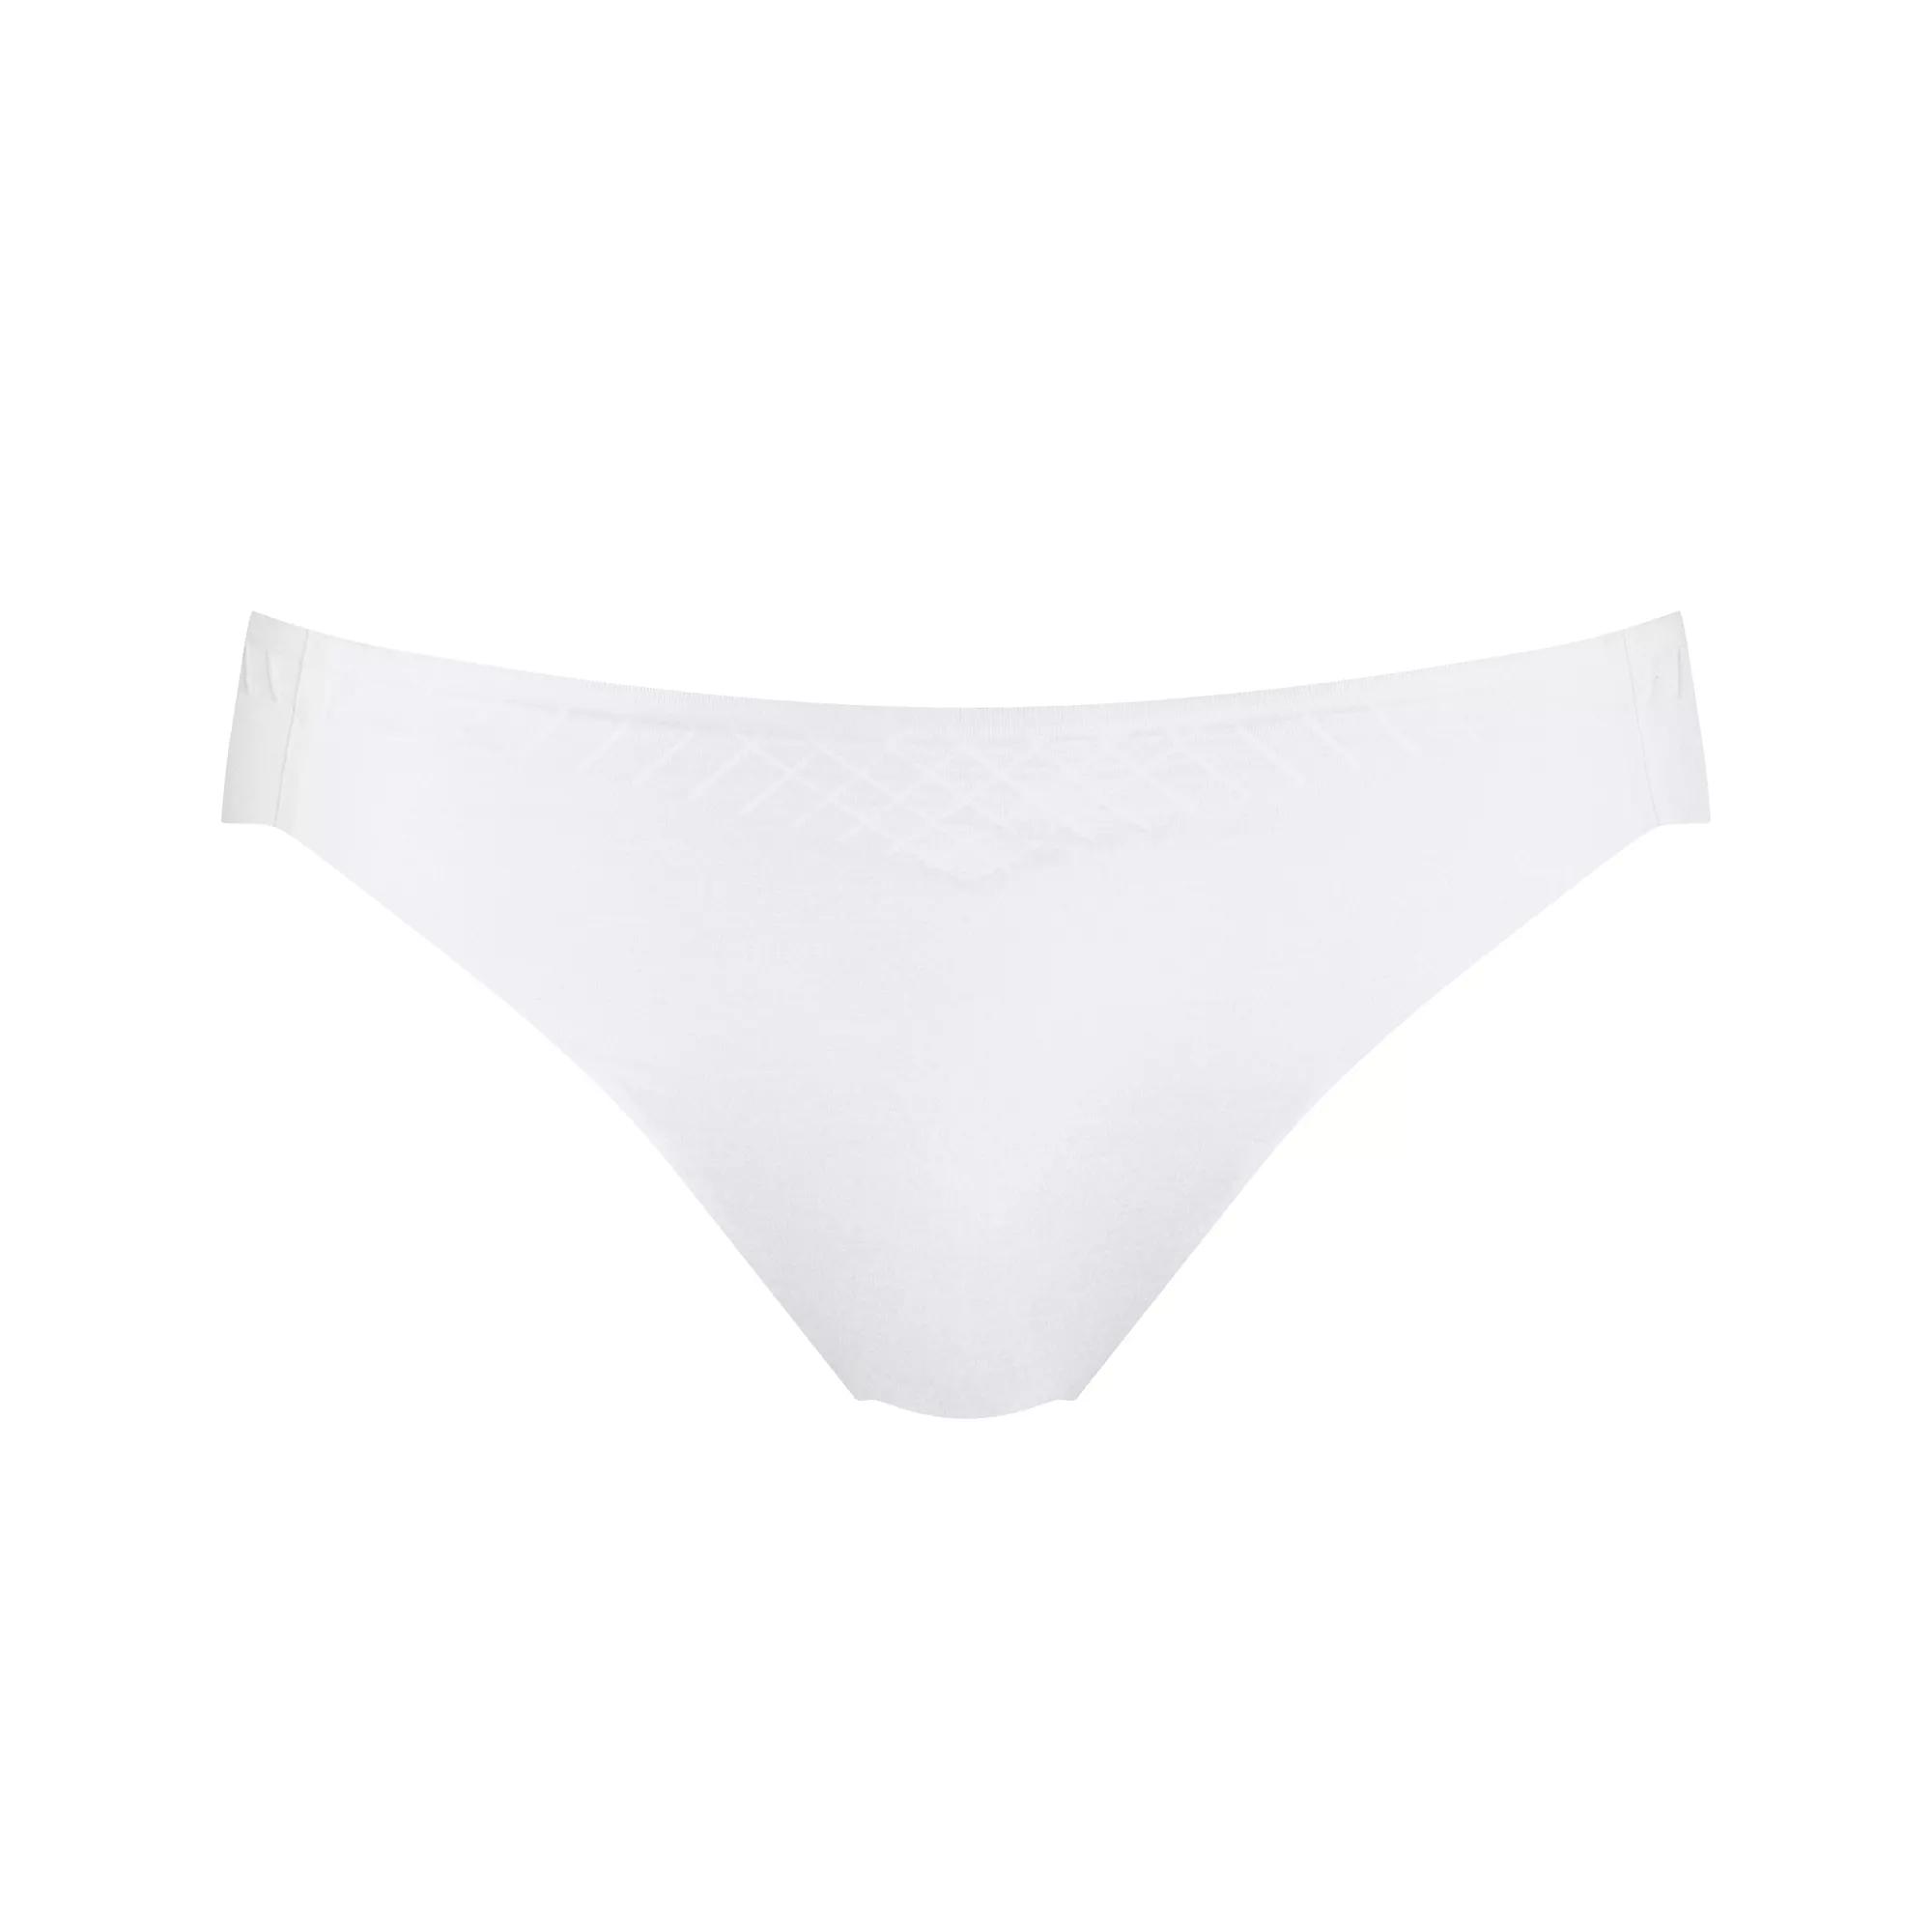 Adaptive High Waist Brief Panty, For Women with Disabilities